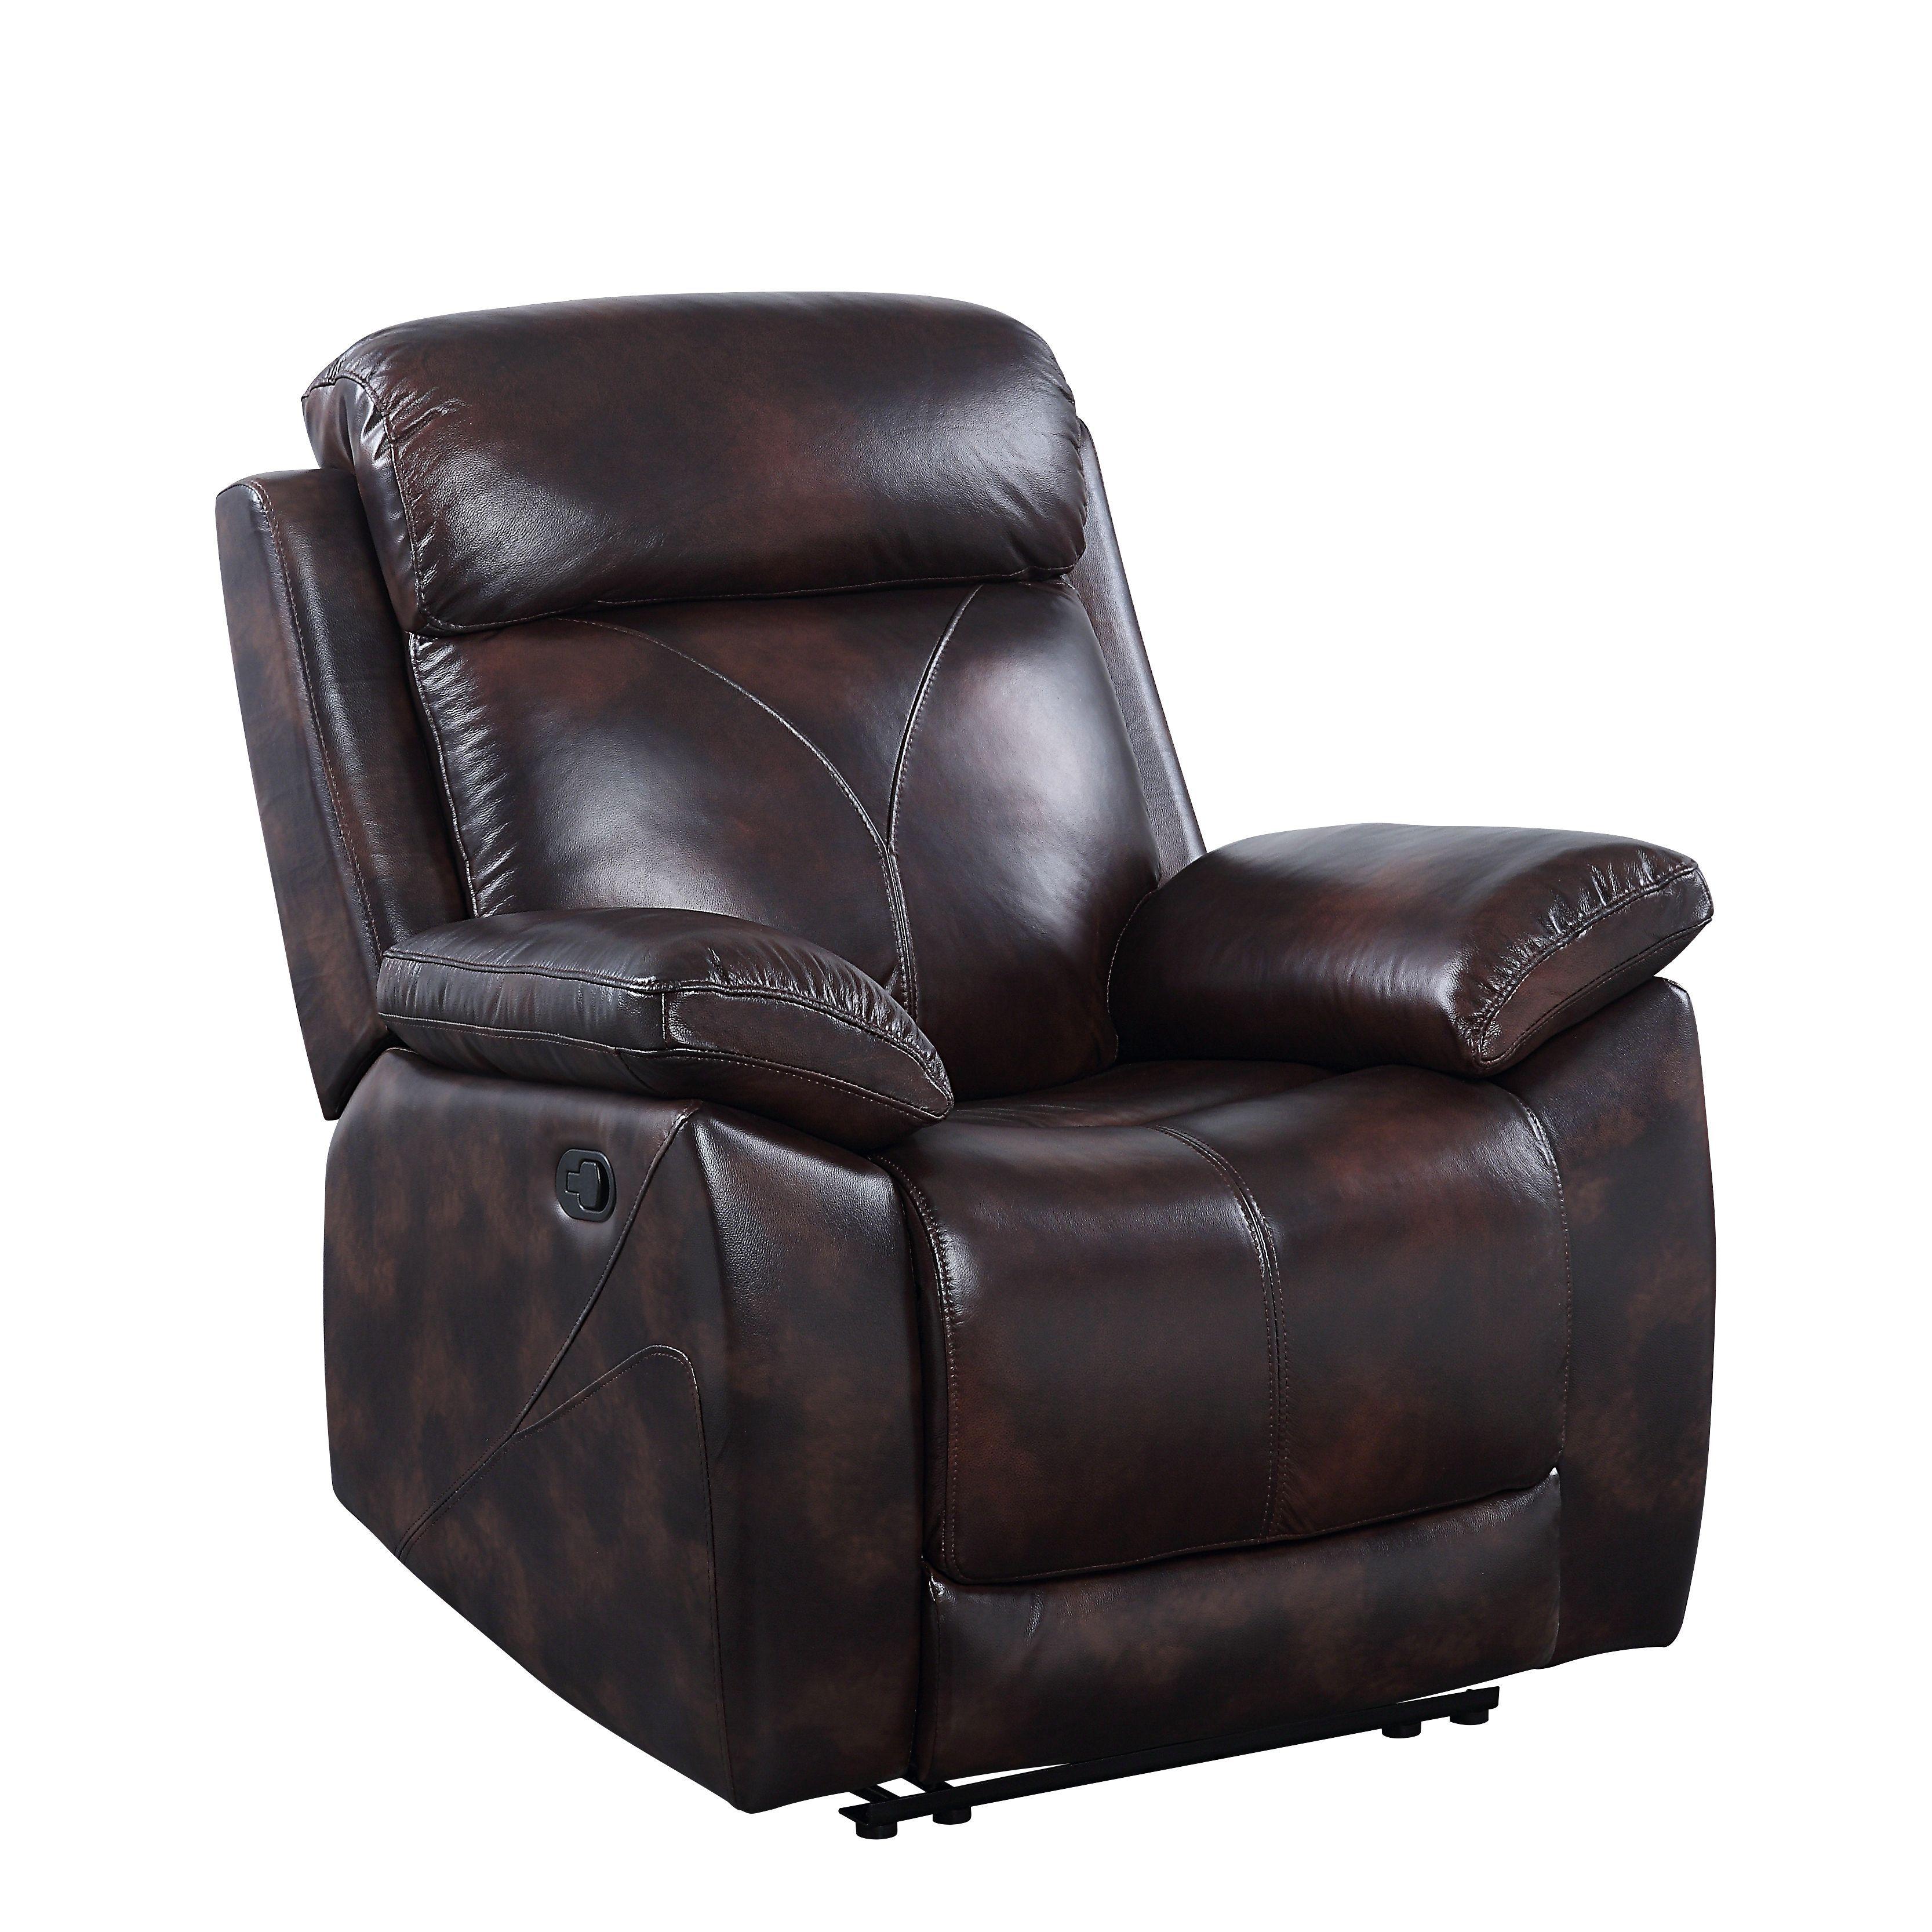 

    
Contemporary Dark Brown Leather Recliner by Acme Perfiel LV00068
